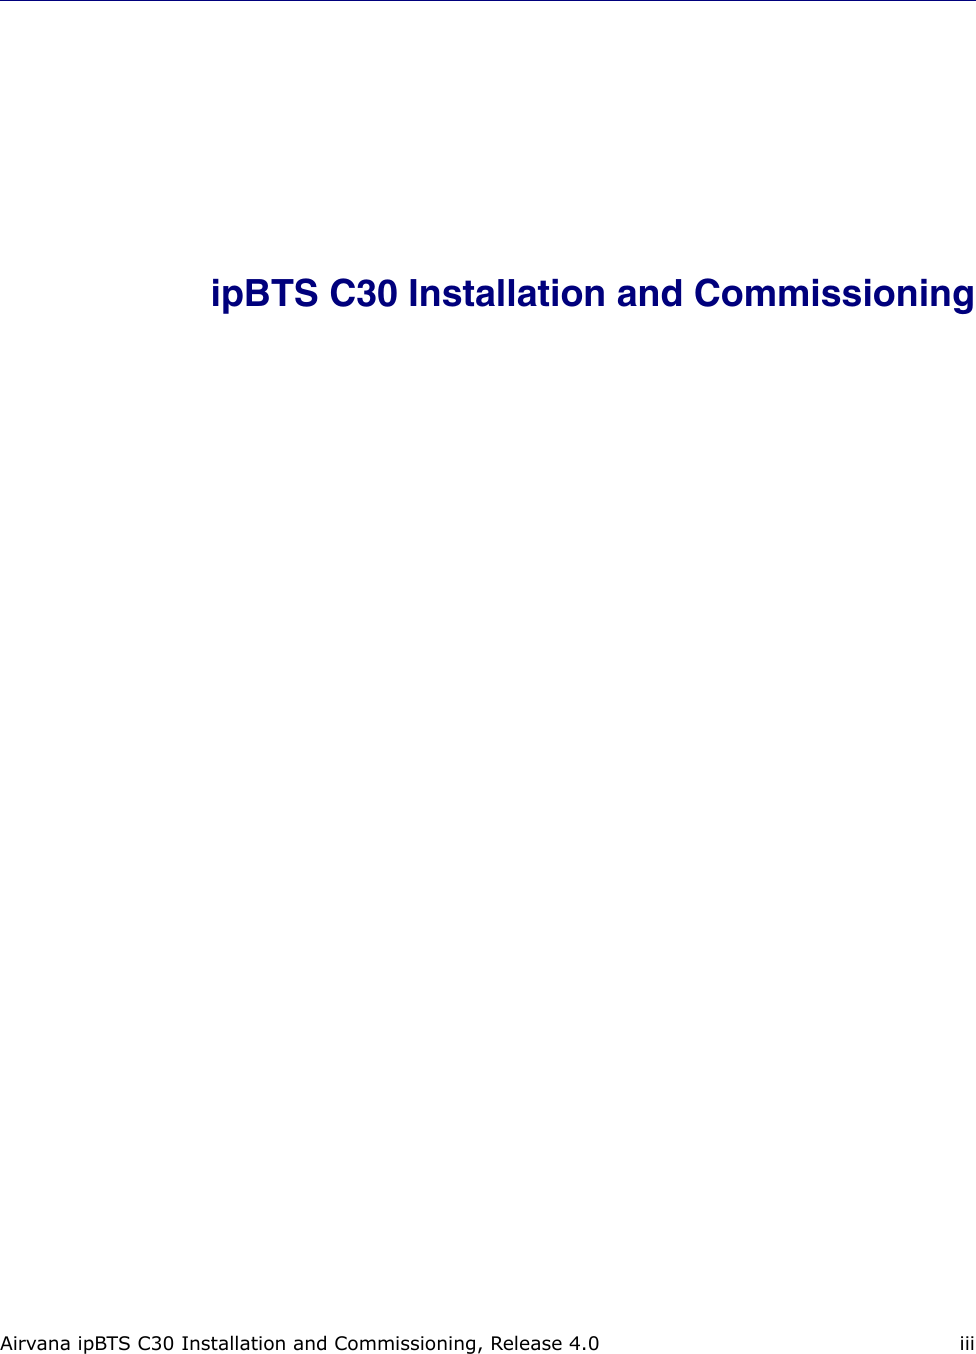 Airvana ipBTS C30 Installation and Commissioning, Release 4.0 iiiipBTS C30 Installation and Commissioning